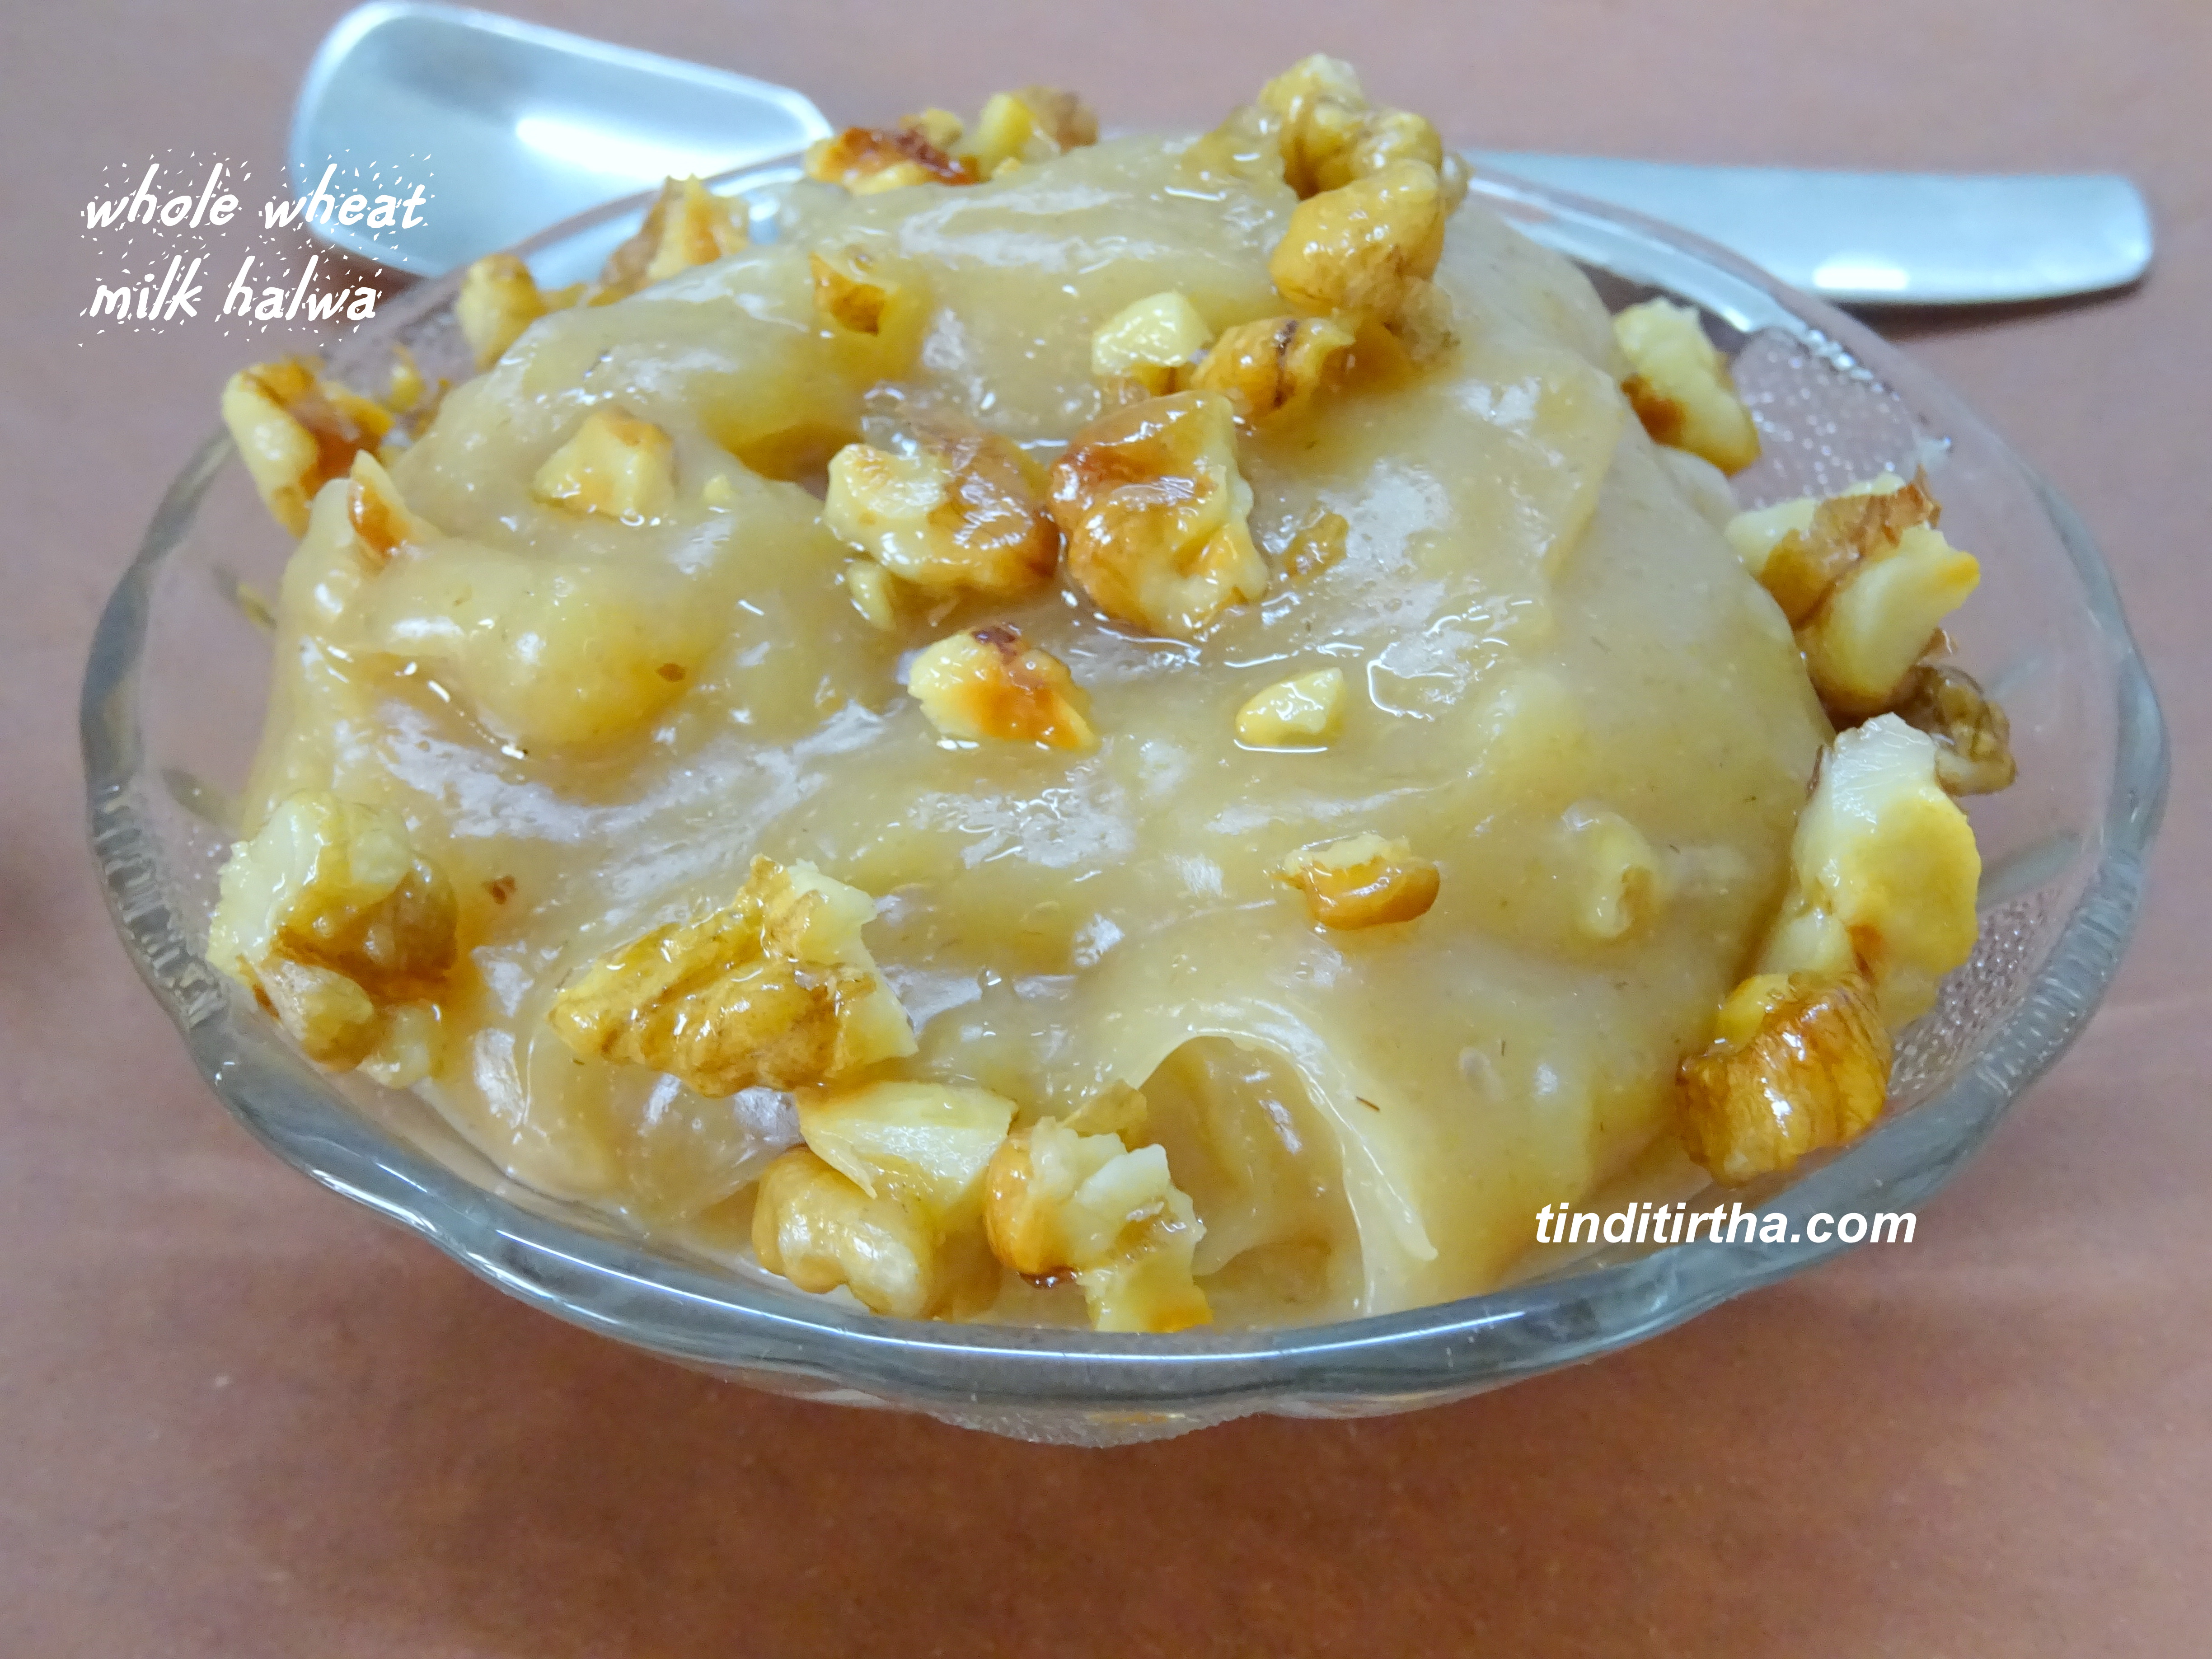 WHOLE WHEAT MILK HALWA…. a diabetic friendly recipe with the goodness of jaggery & walnuts